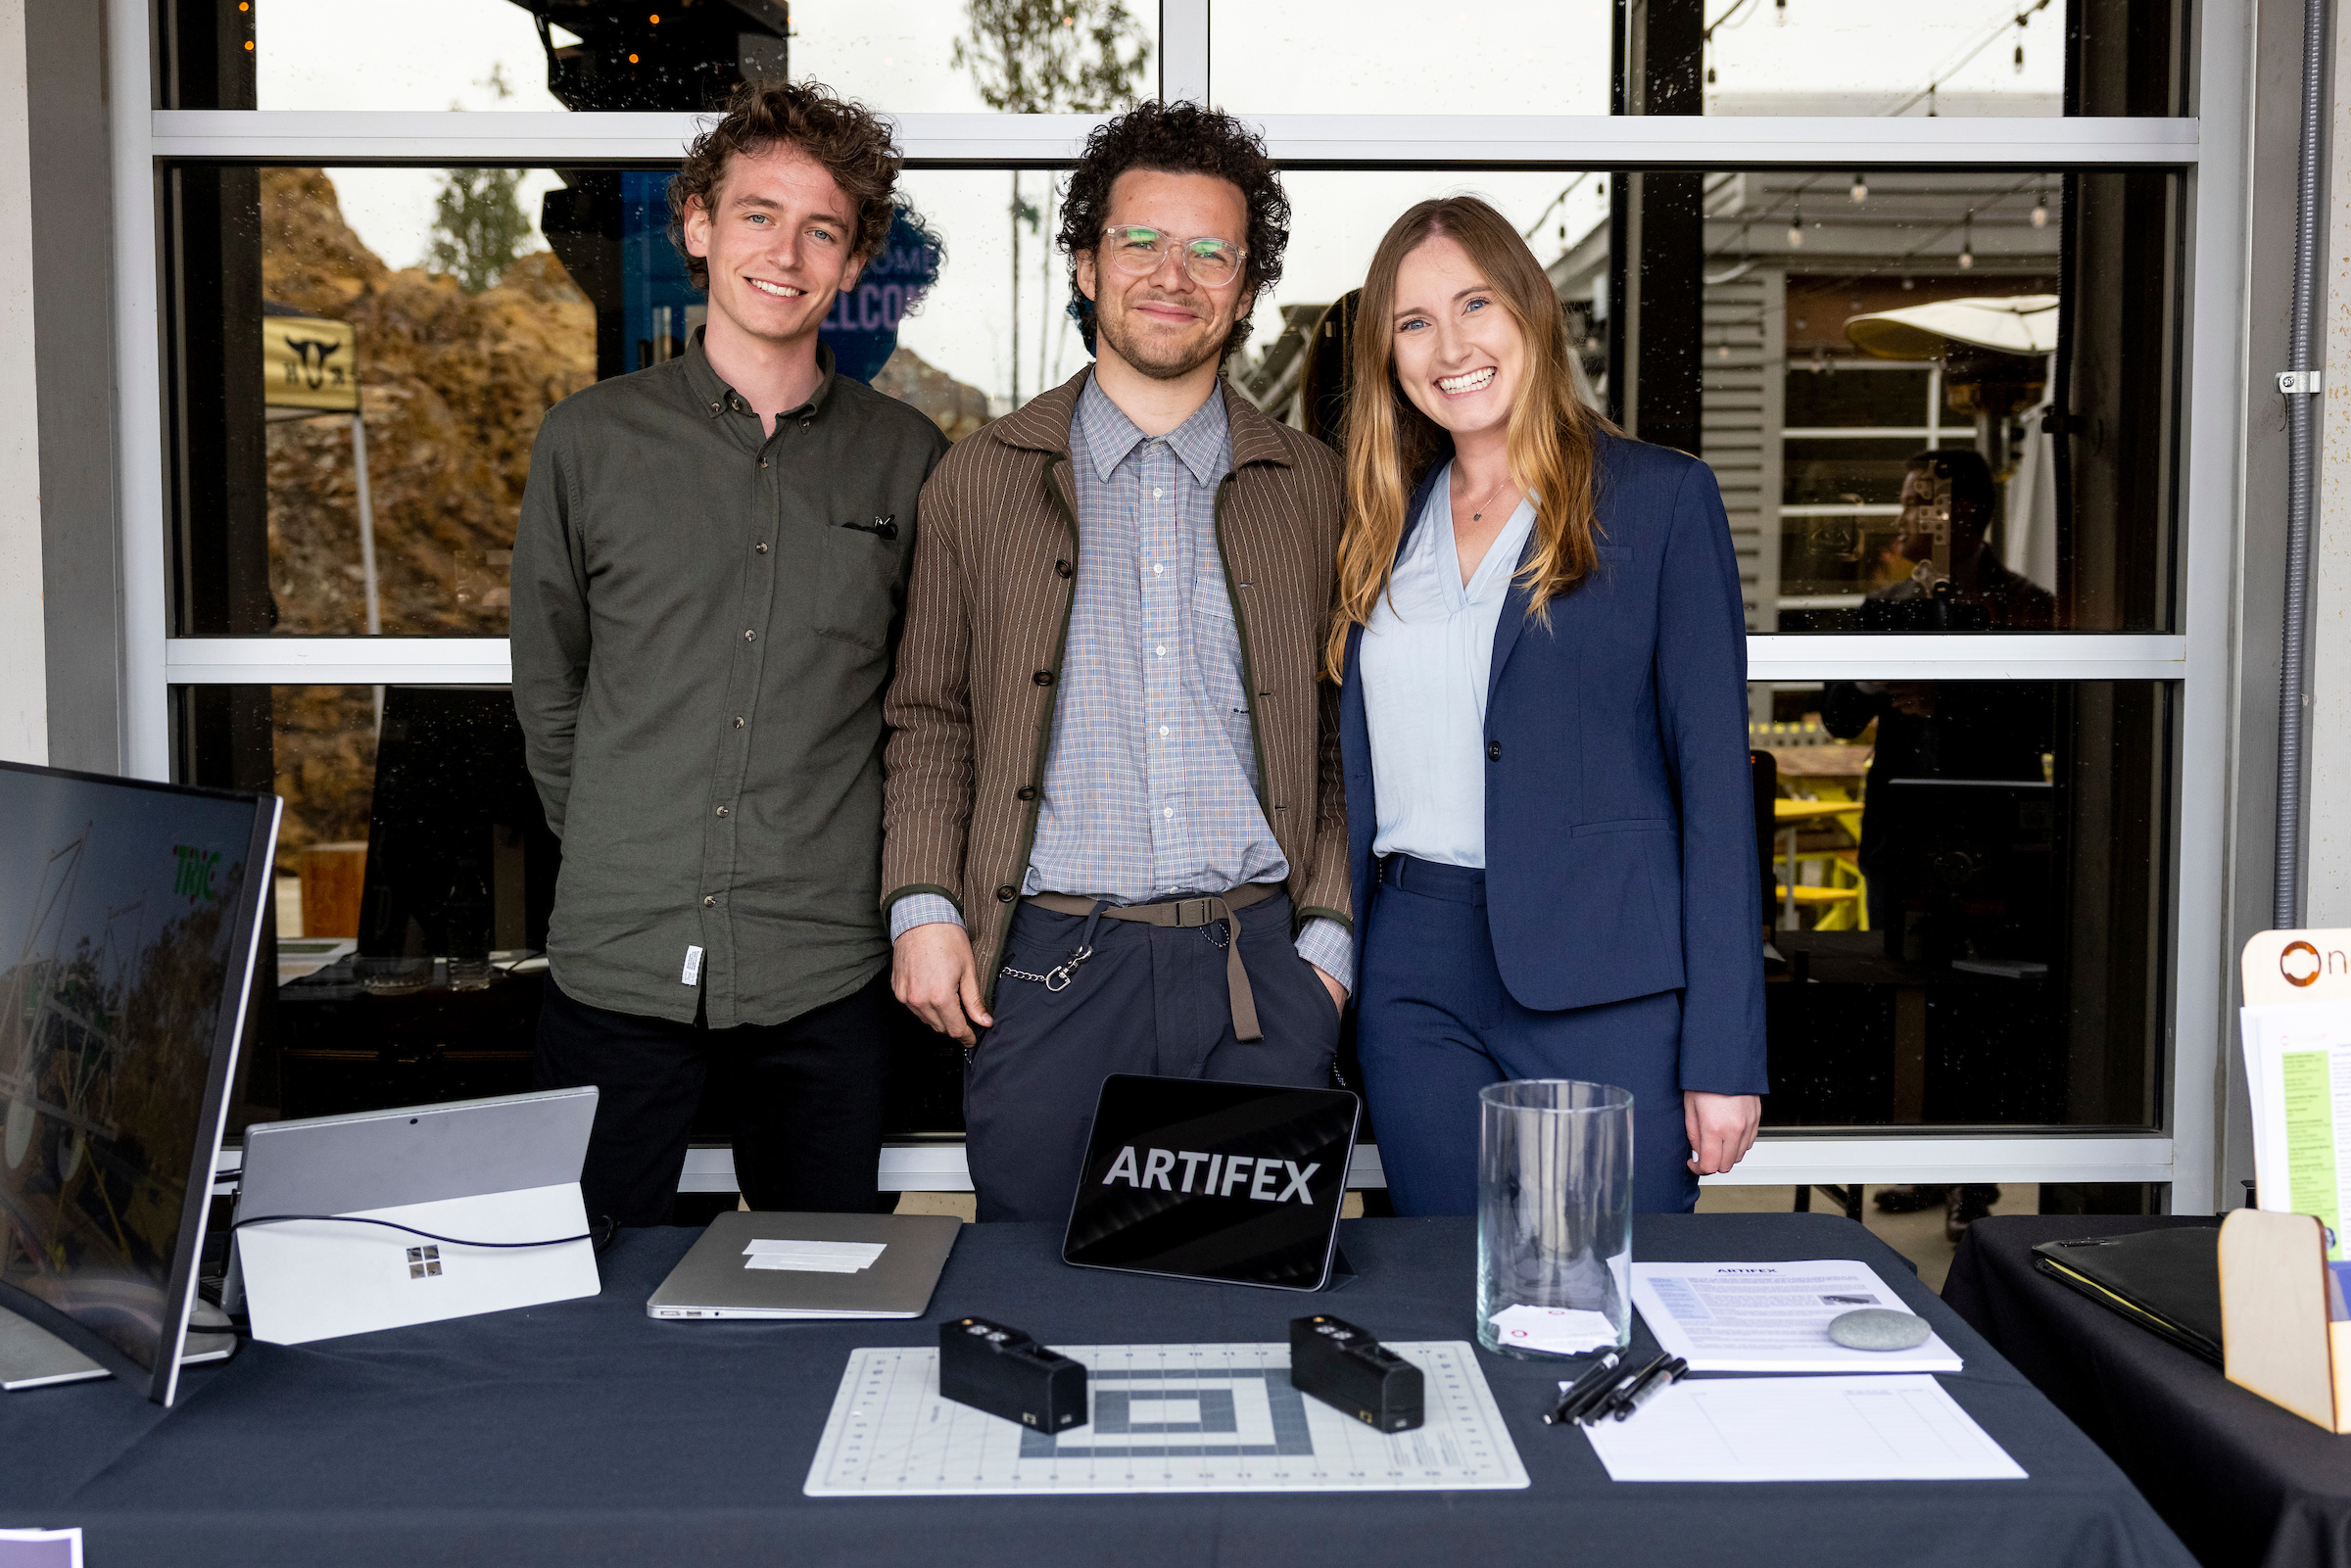 Three people stand behind a table smiling. On the table are blueprint pages and a tablet with the name ARTIFEX displayed on it.